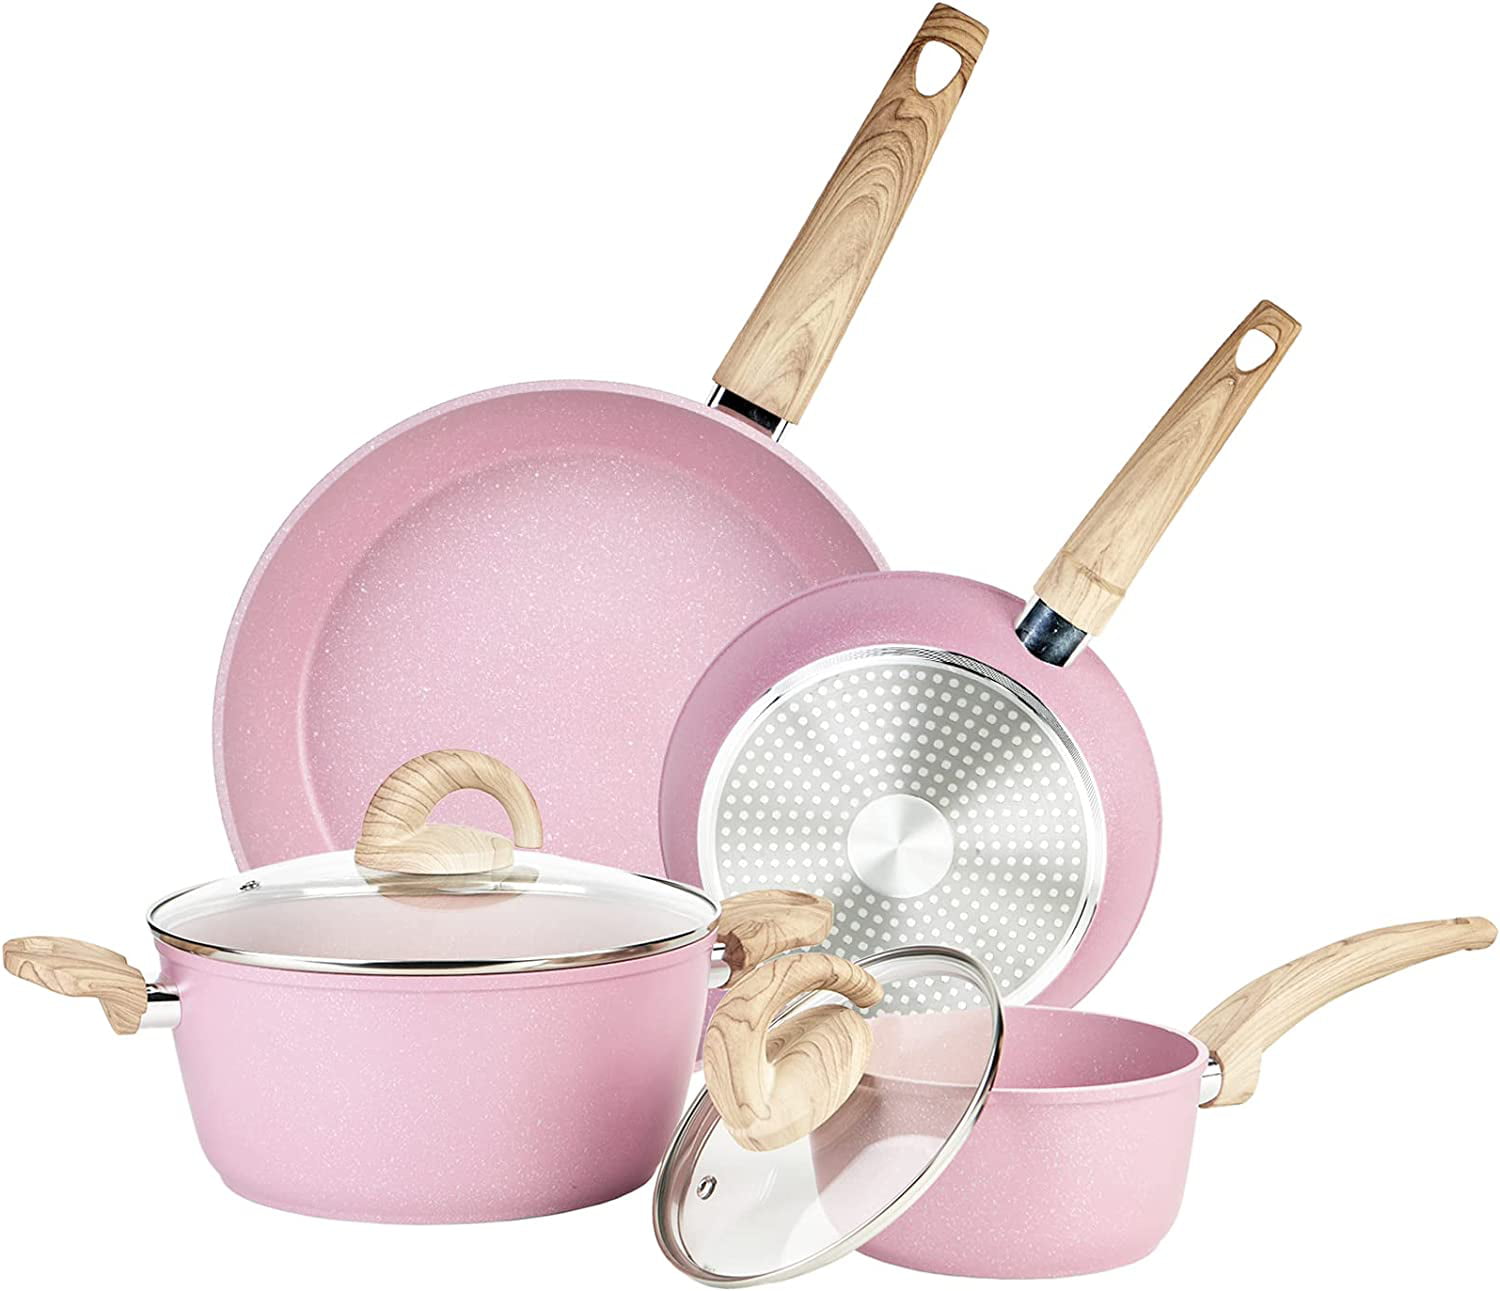 ROLTIN 7Pcs/ Set Cookware Set Kitchenware Saucepan Cooking Pot and Pan Set  Non- St?ck Granite Stainless Steel Kitchen (Color : Black) (Pink Variety